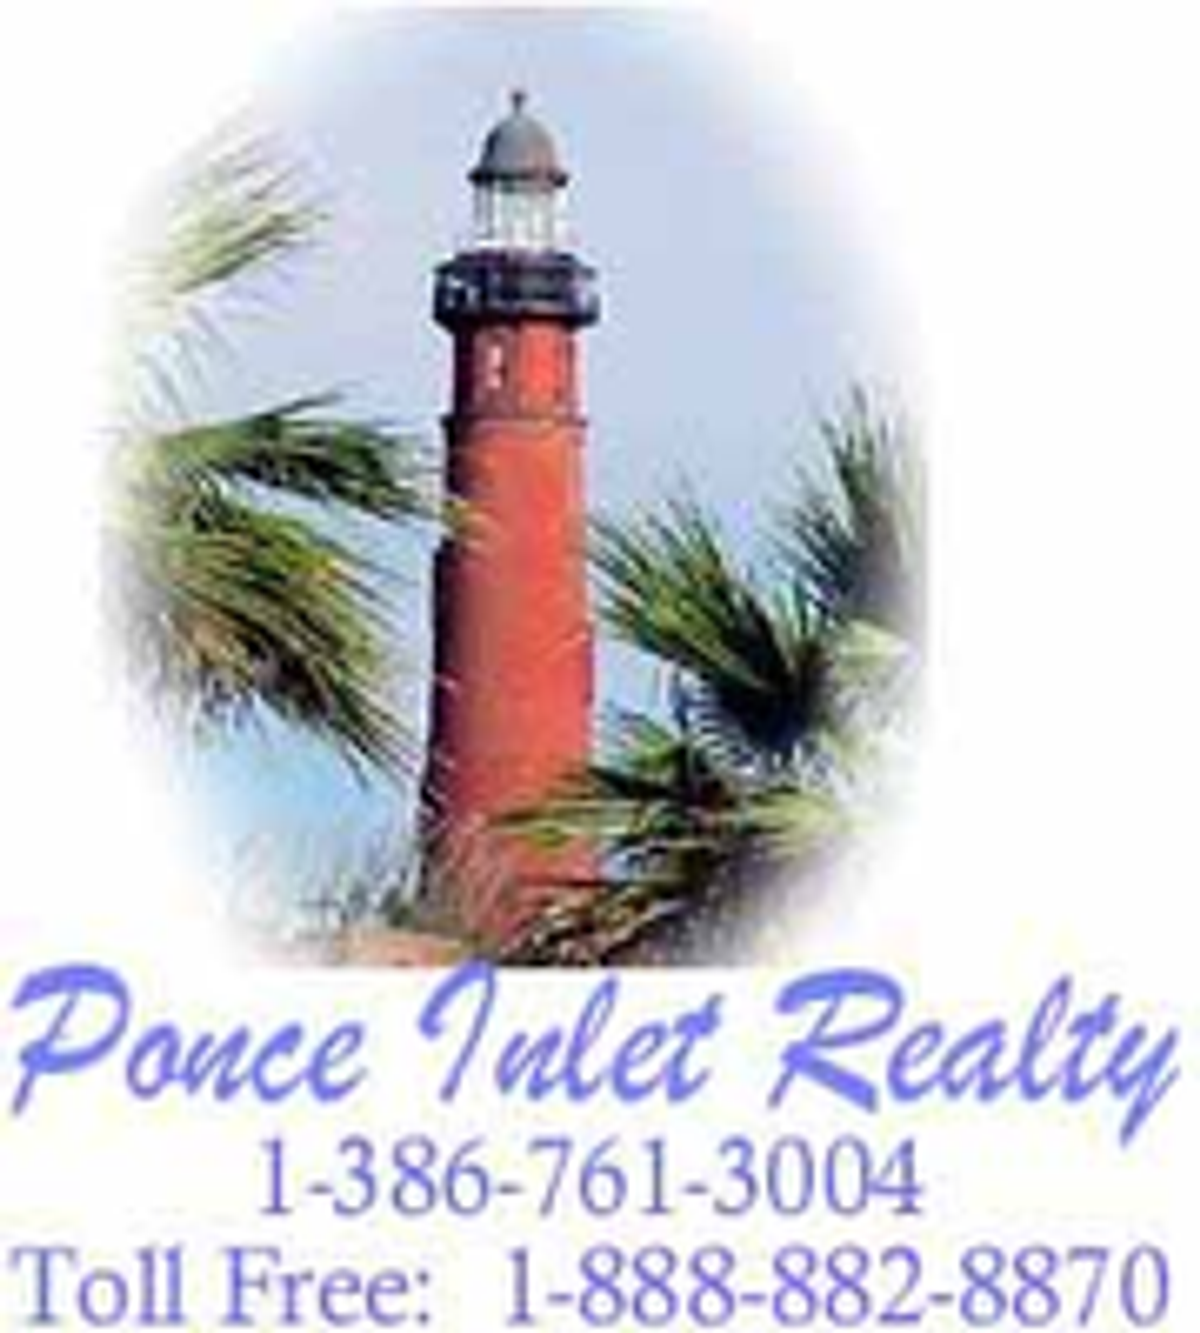 Photo for Sue Burns, Listing Agent at Ponce Inlet Realty, Inc